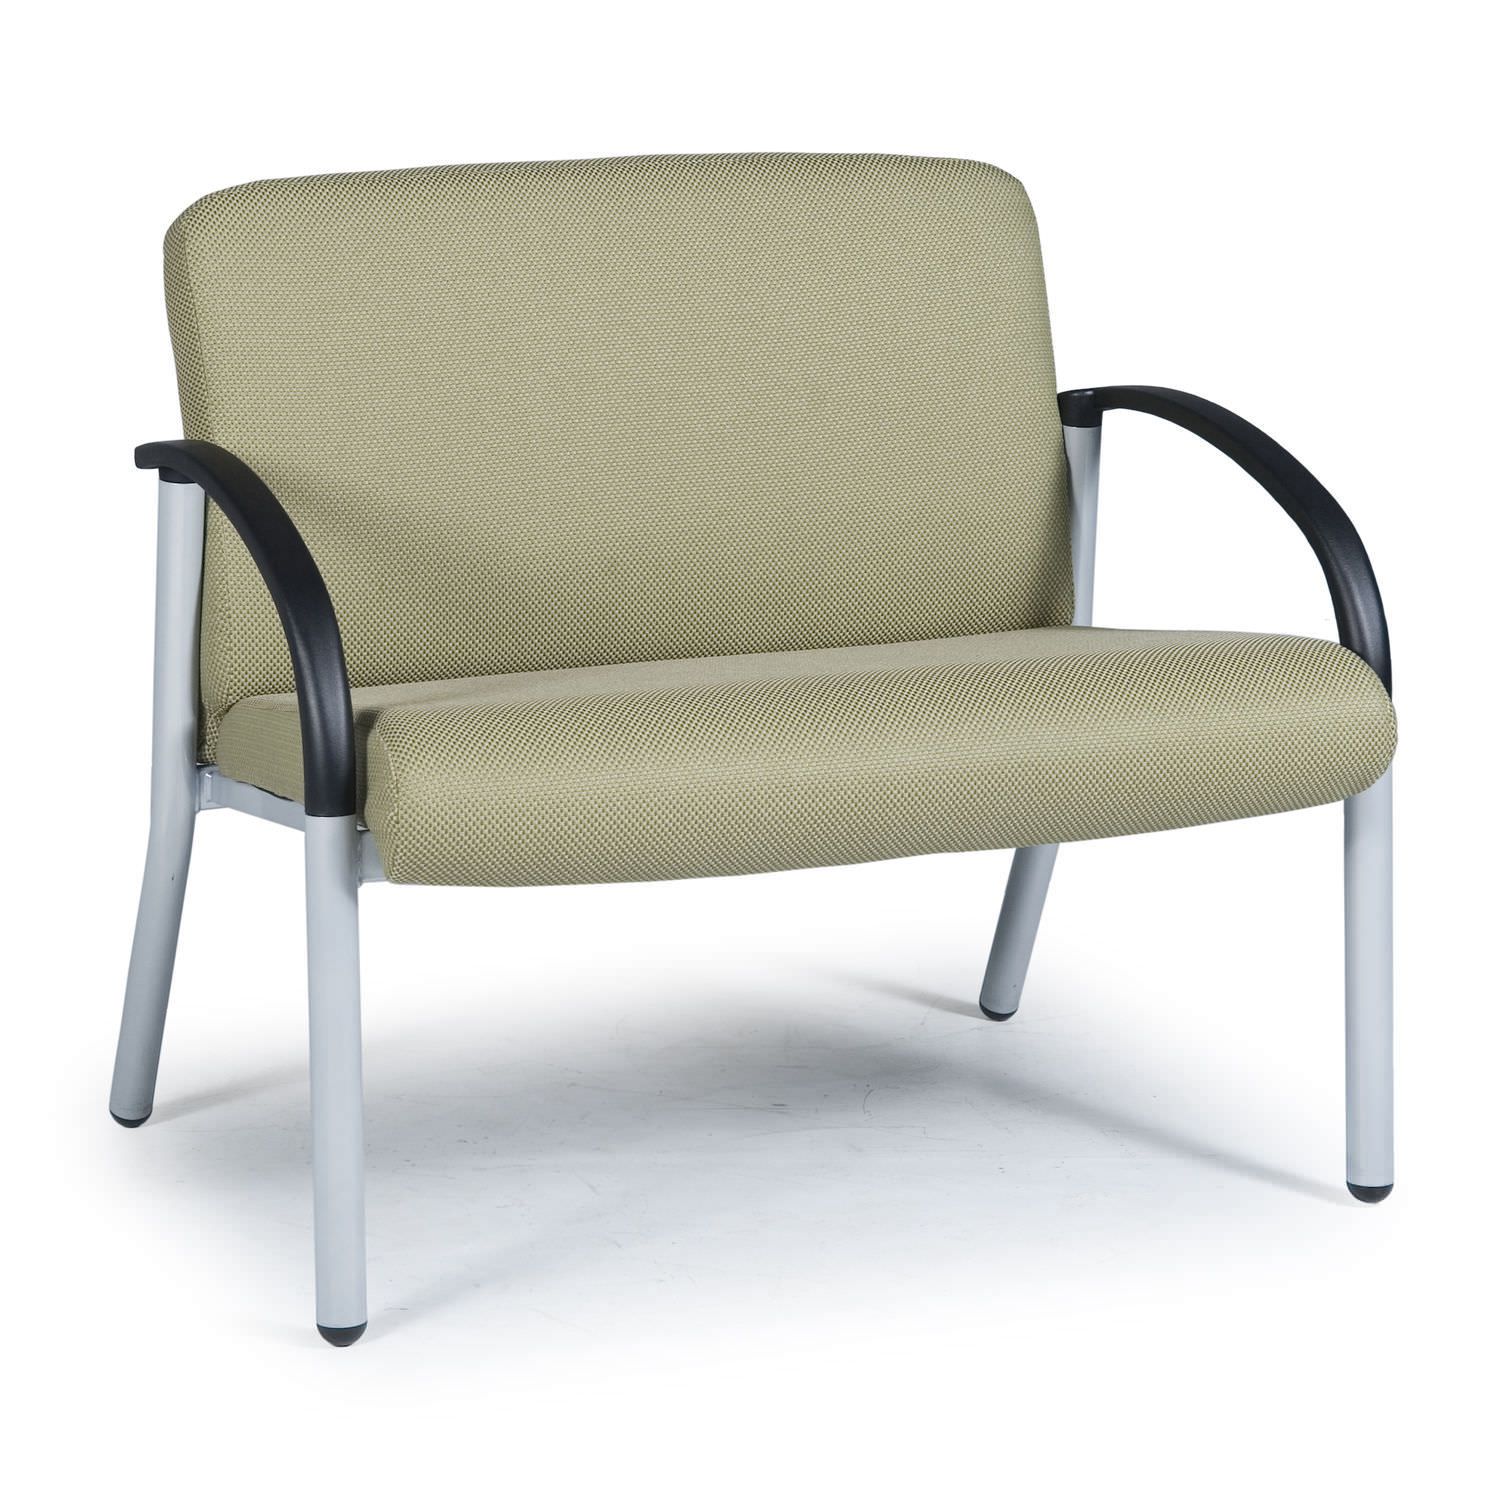 Chair with armrests / bariatric Companion 92185BWS La-Z-Boy Contract Furniture